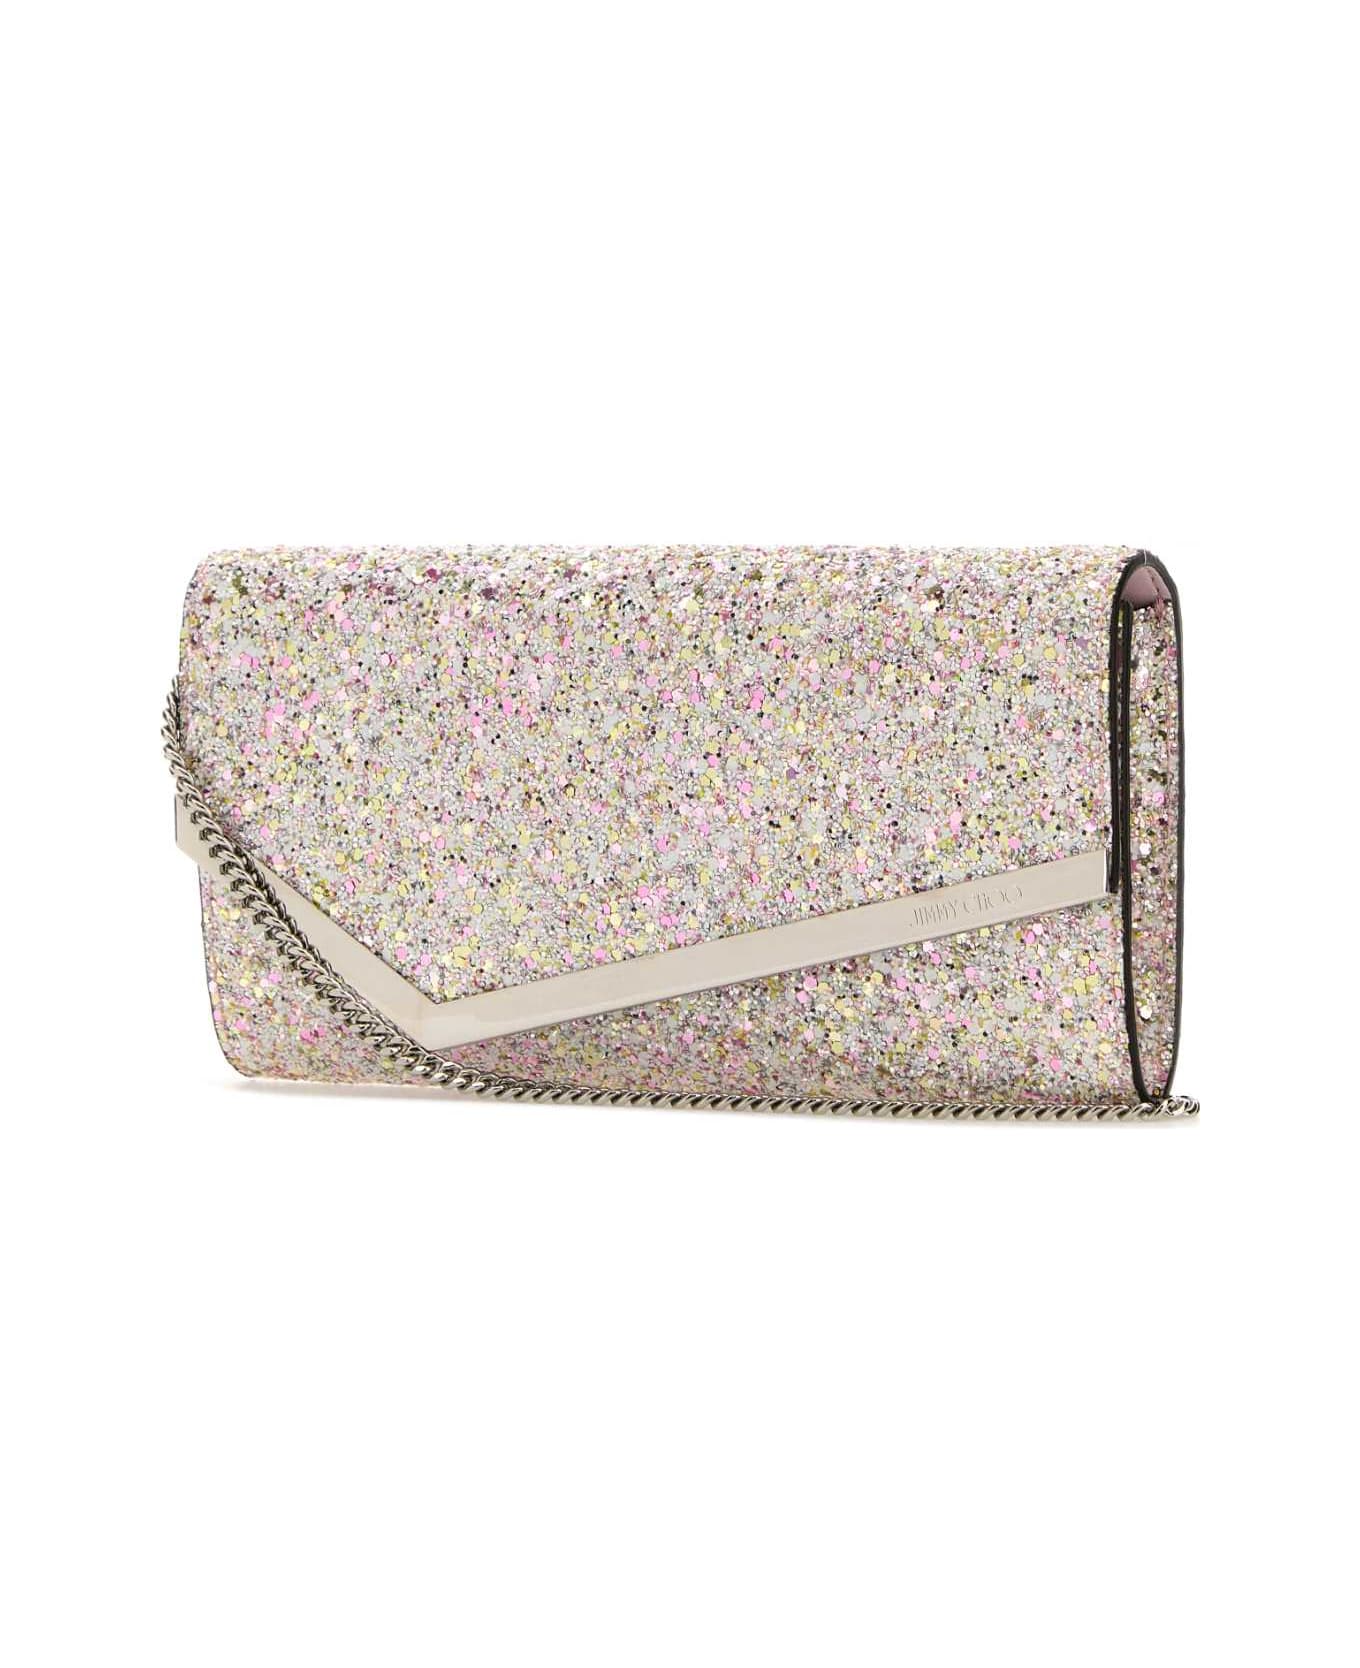 Jimmy Choo Embellished Fabric Emmie Clutch - CANDYPINKLATTEMIXSILVER クラッチバッグ